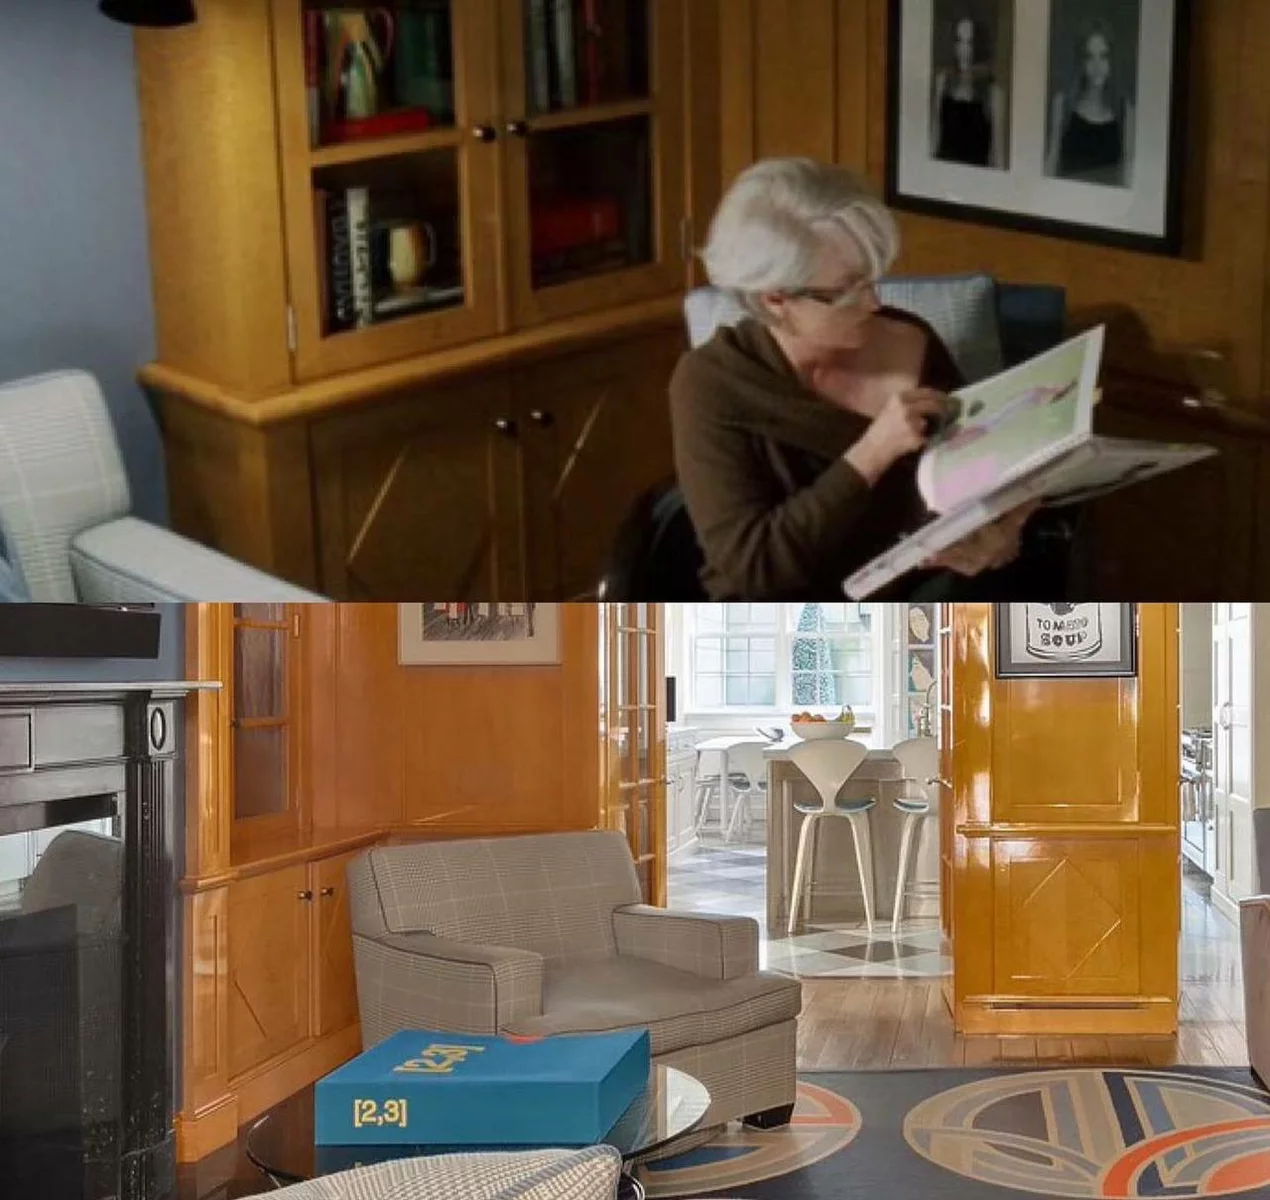 the parallel between the scene in the movie and the actual interior of the house